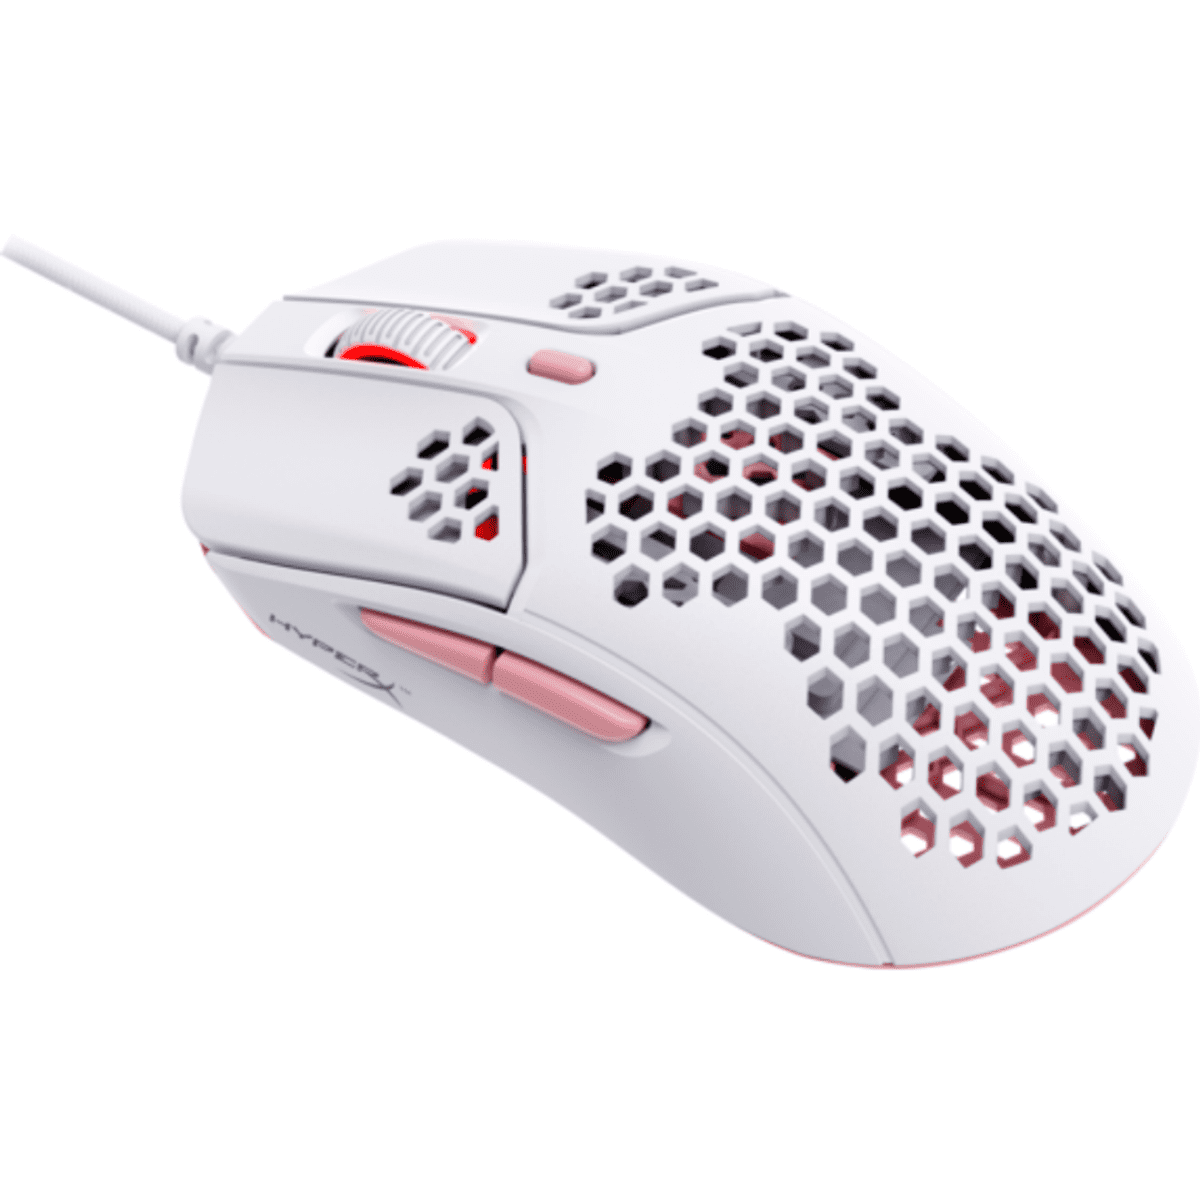 HyperX Pulsefire Haste Gaming USB Mouse Ultra Lightweight white pink color